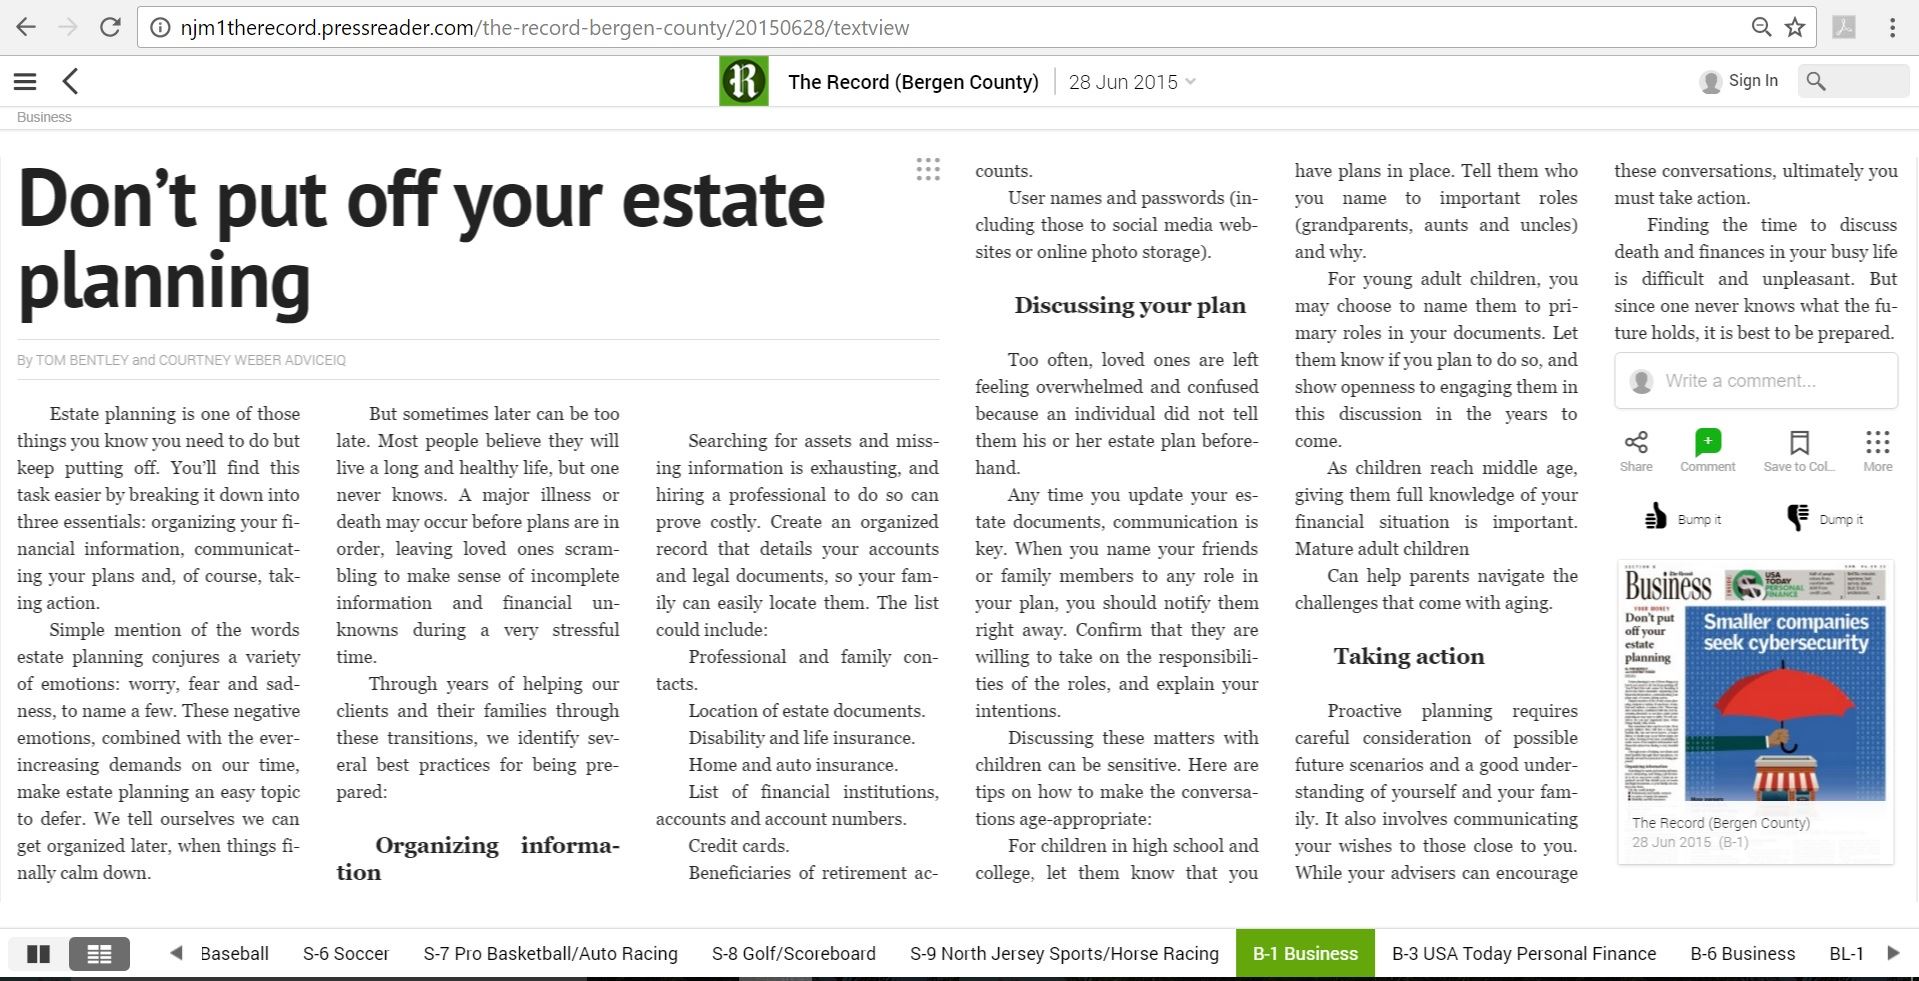 Don't put off your estate planning article by The Bergen Record